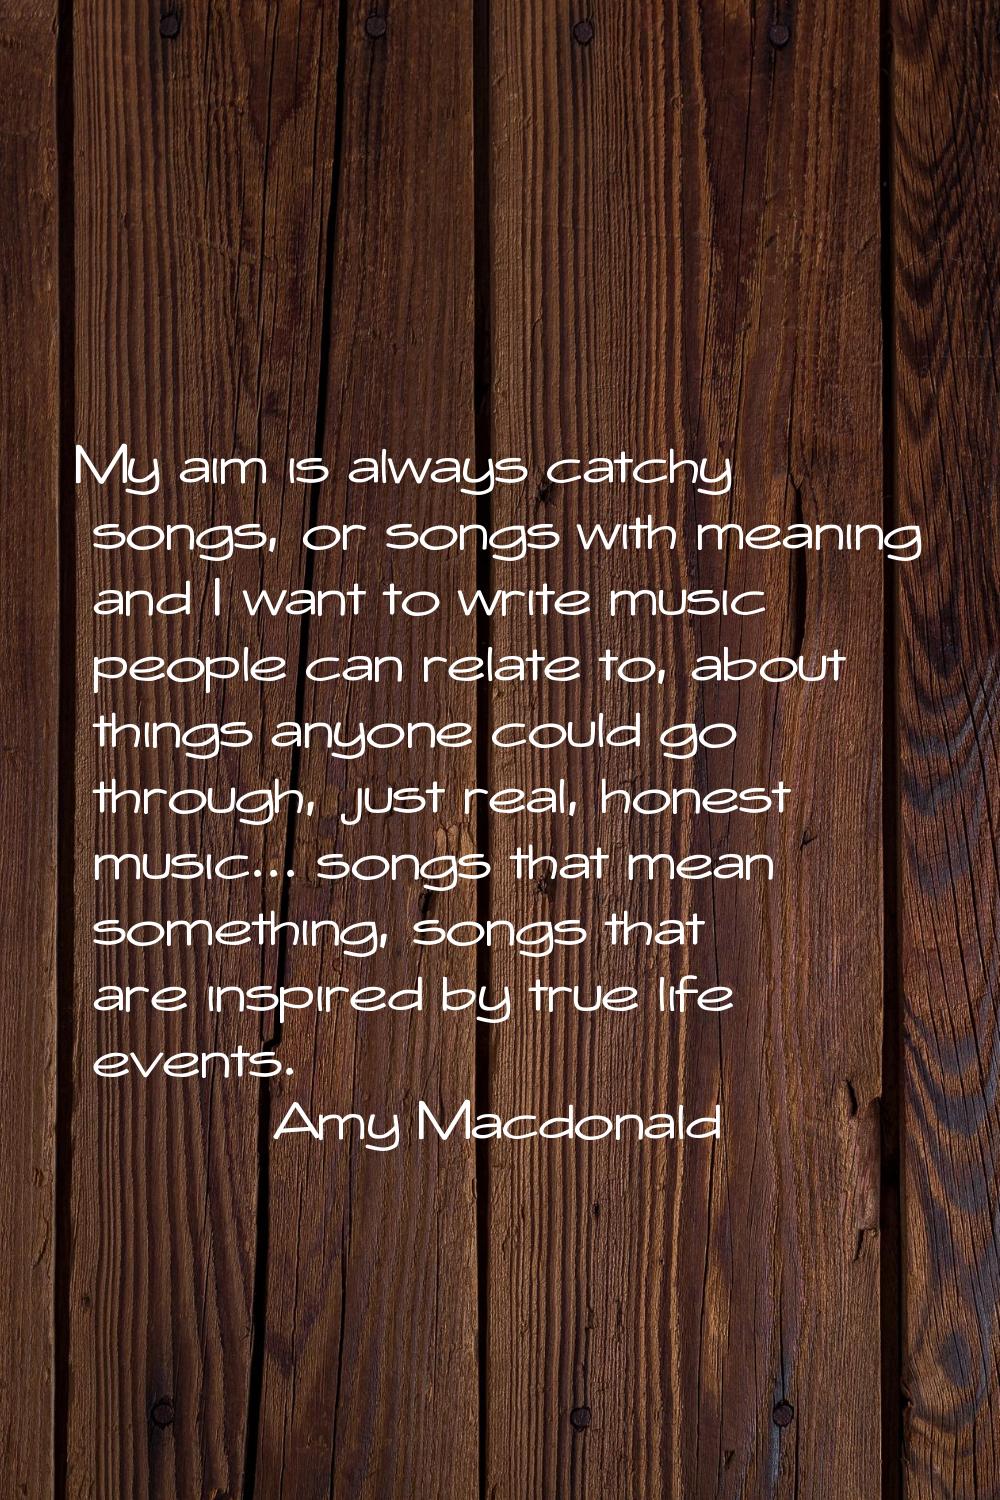 My aim is always catchy songs, or songs with meaning and I want to write music people can relate to